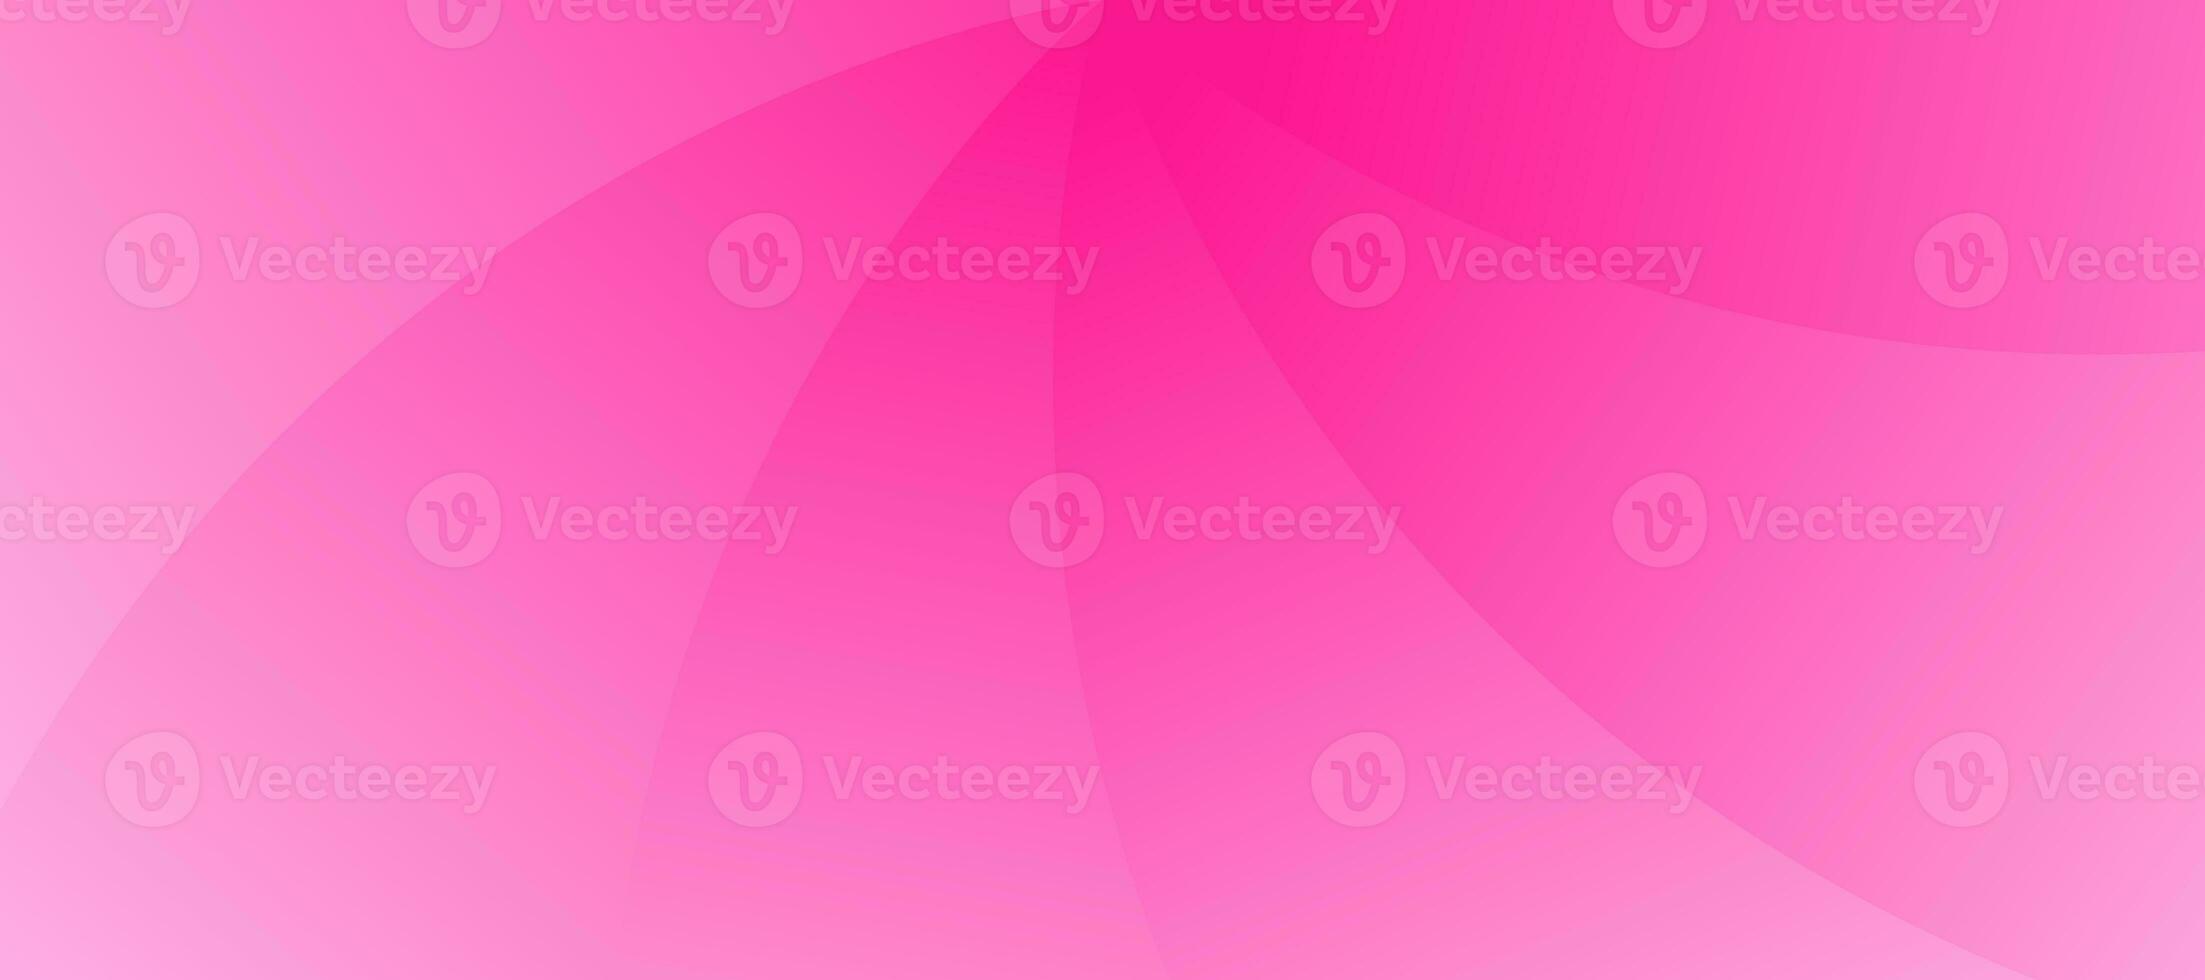 Modern abstract pink background with elegant elements vector illustration photo